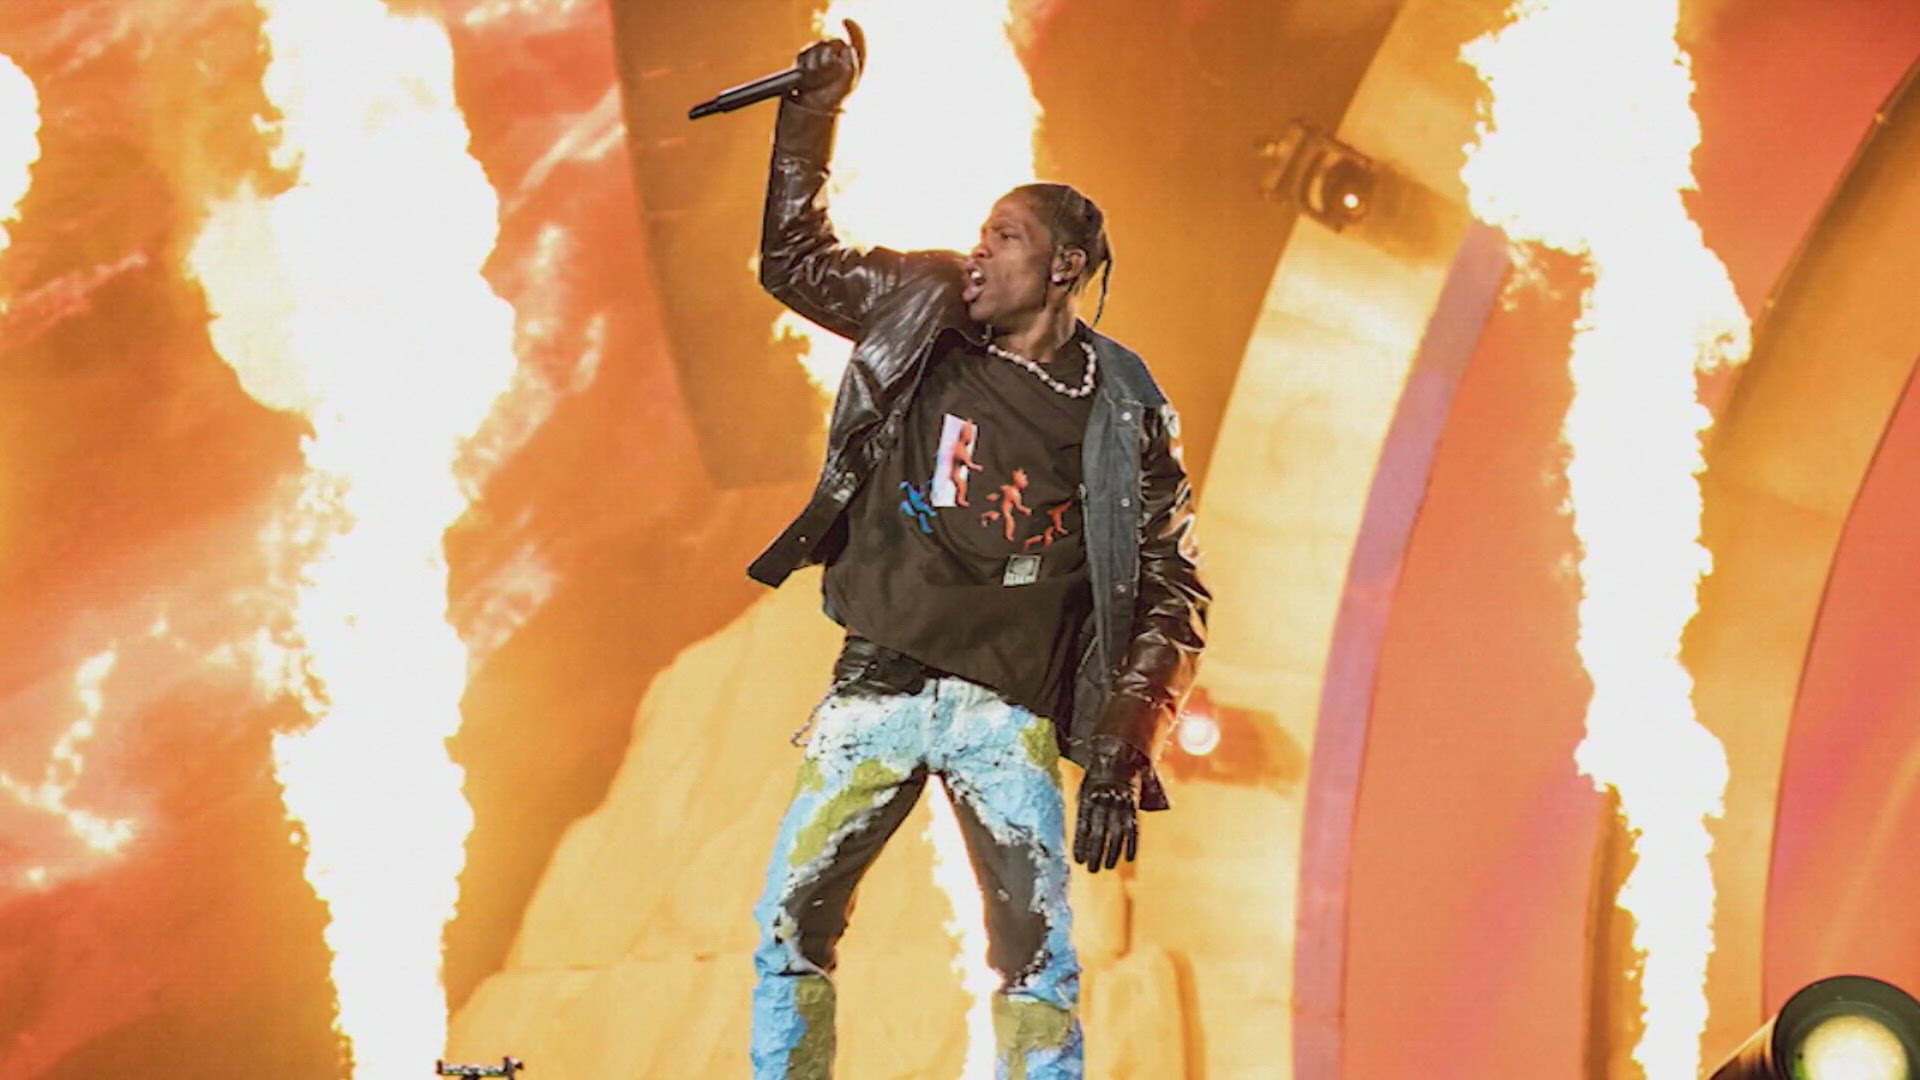 Nine wrongful death lawsuits have been settled two and a half years after a crowd surge at the Astroworld Festival in Houston killed 10 people.